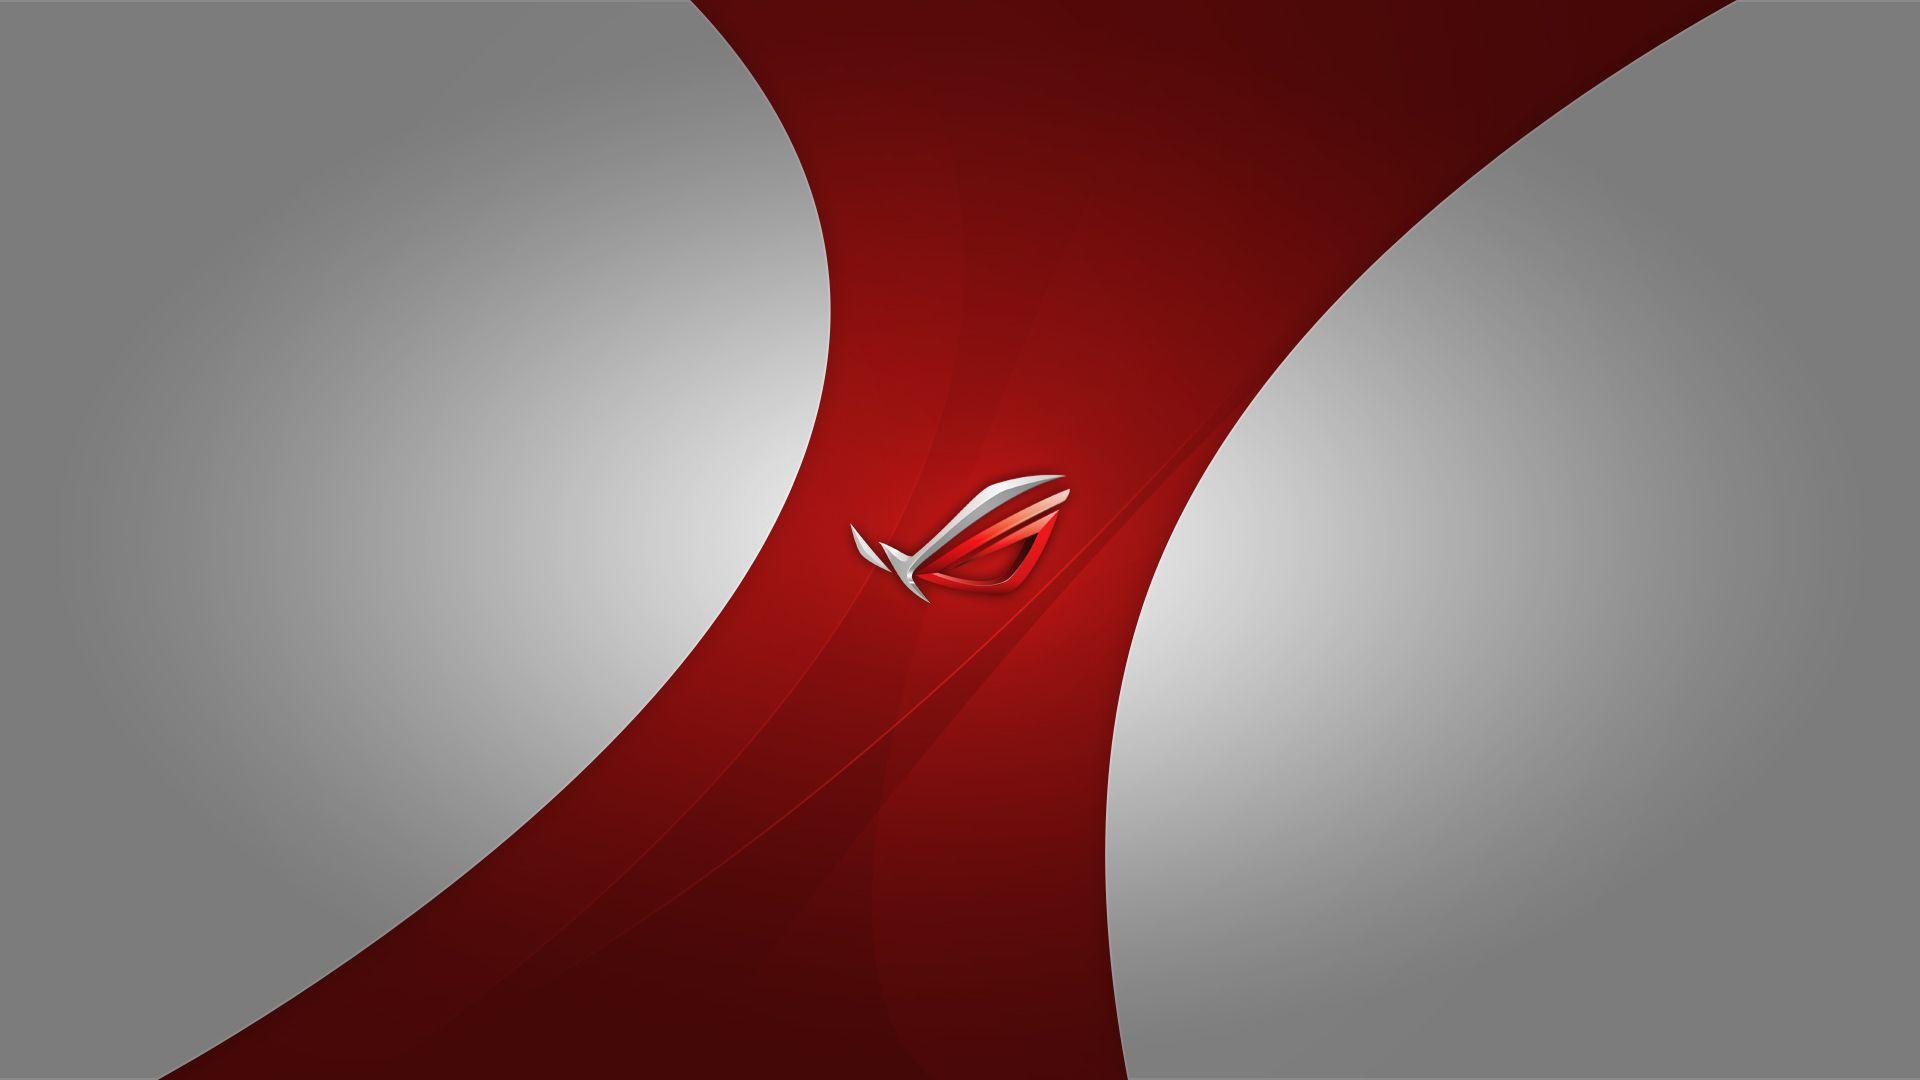 Asus Rog Wallpapers Hd Resolution For Free Wallpaper - Republic Of Gamers Wallpaper White - HD Wallpaper 